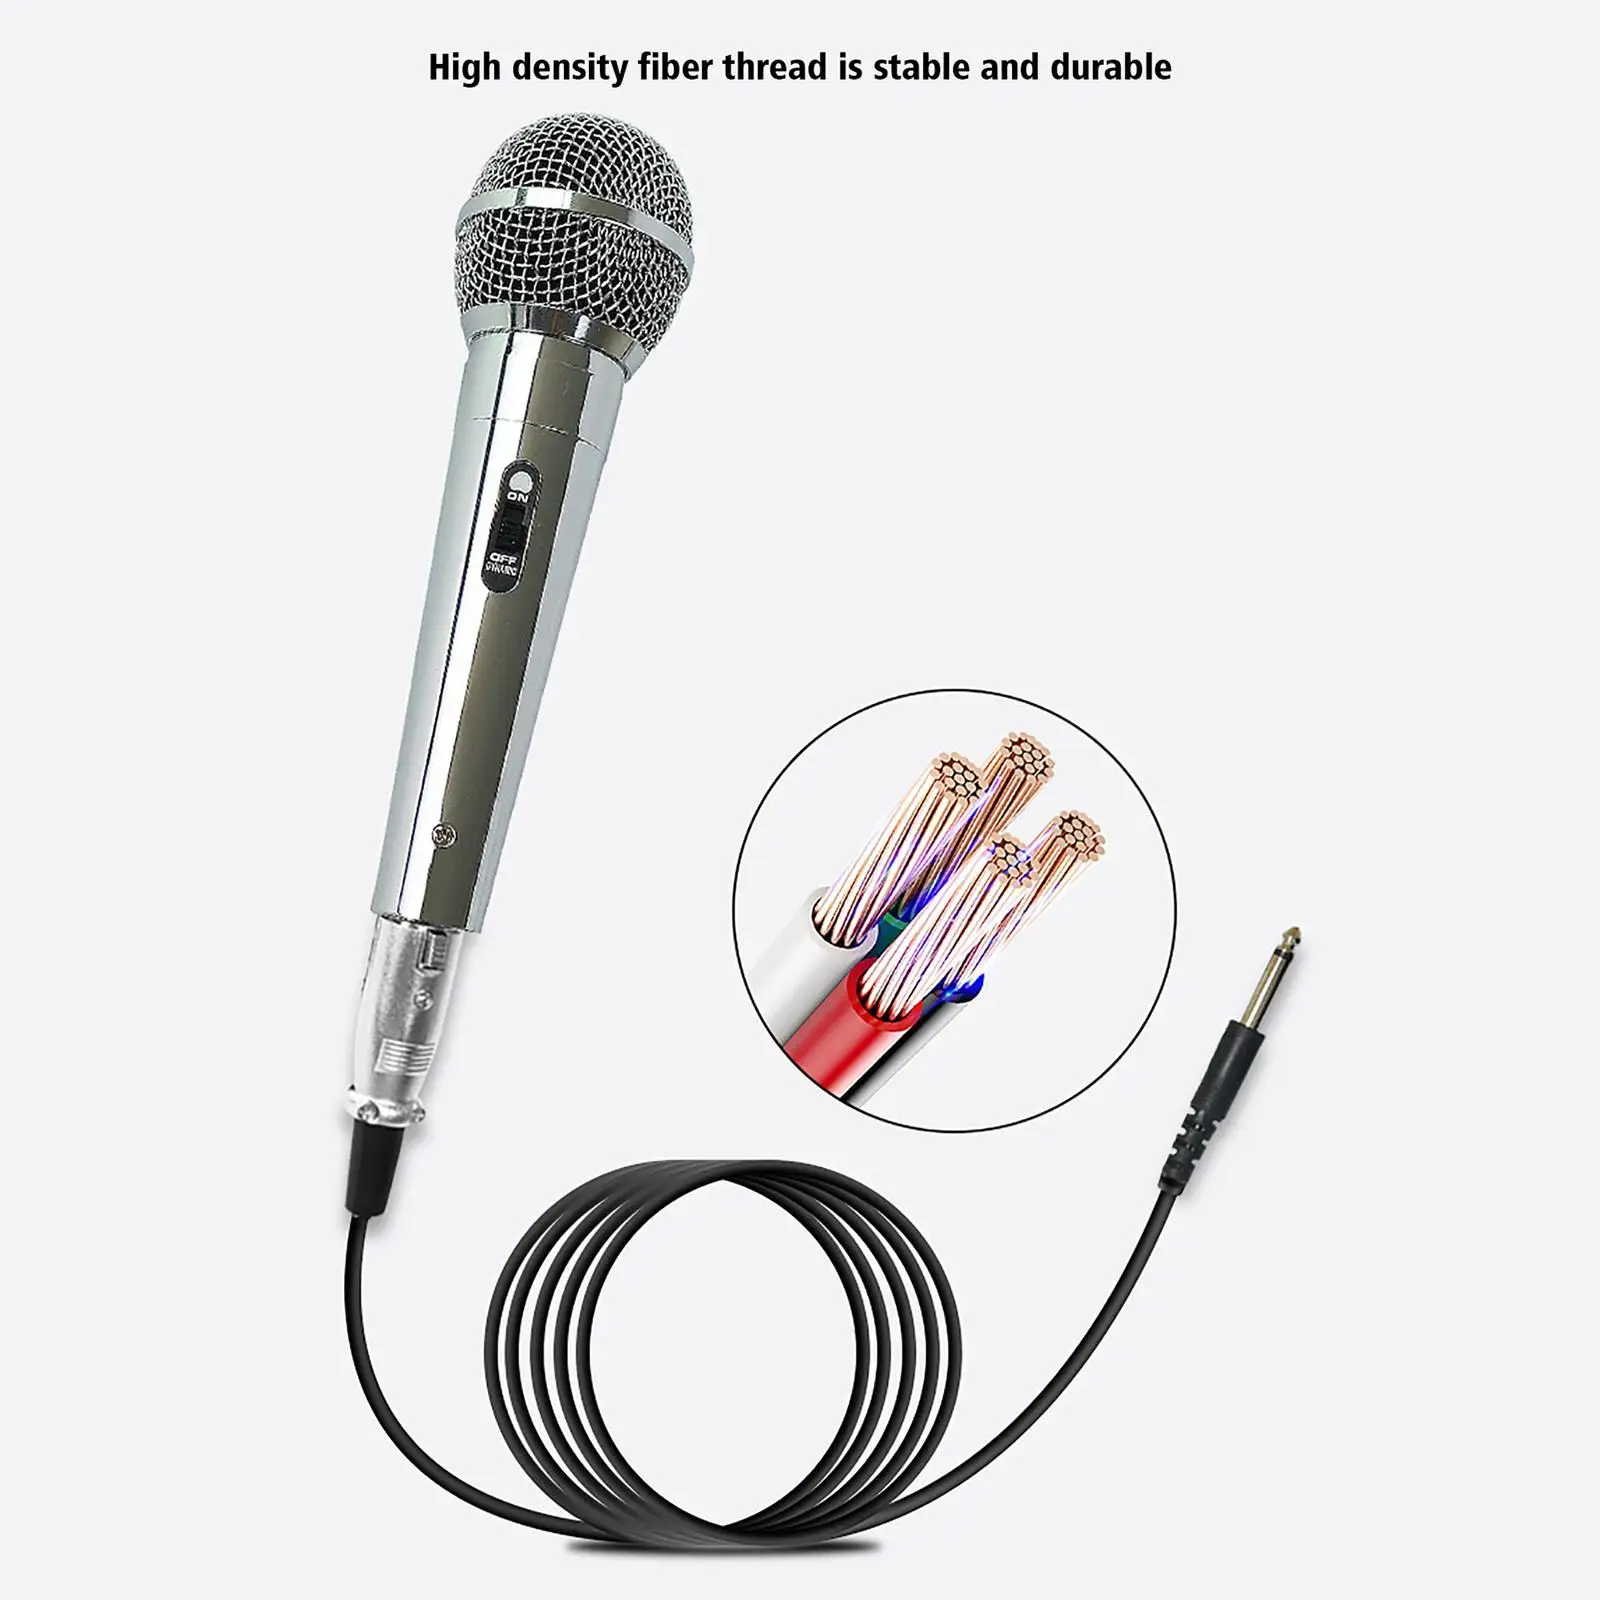 Karaoke Microphone High Performance Premium Dynamic Vocal Microphone Handheld Microphone for Party Home Mixer Performance Show